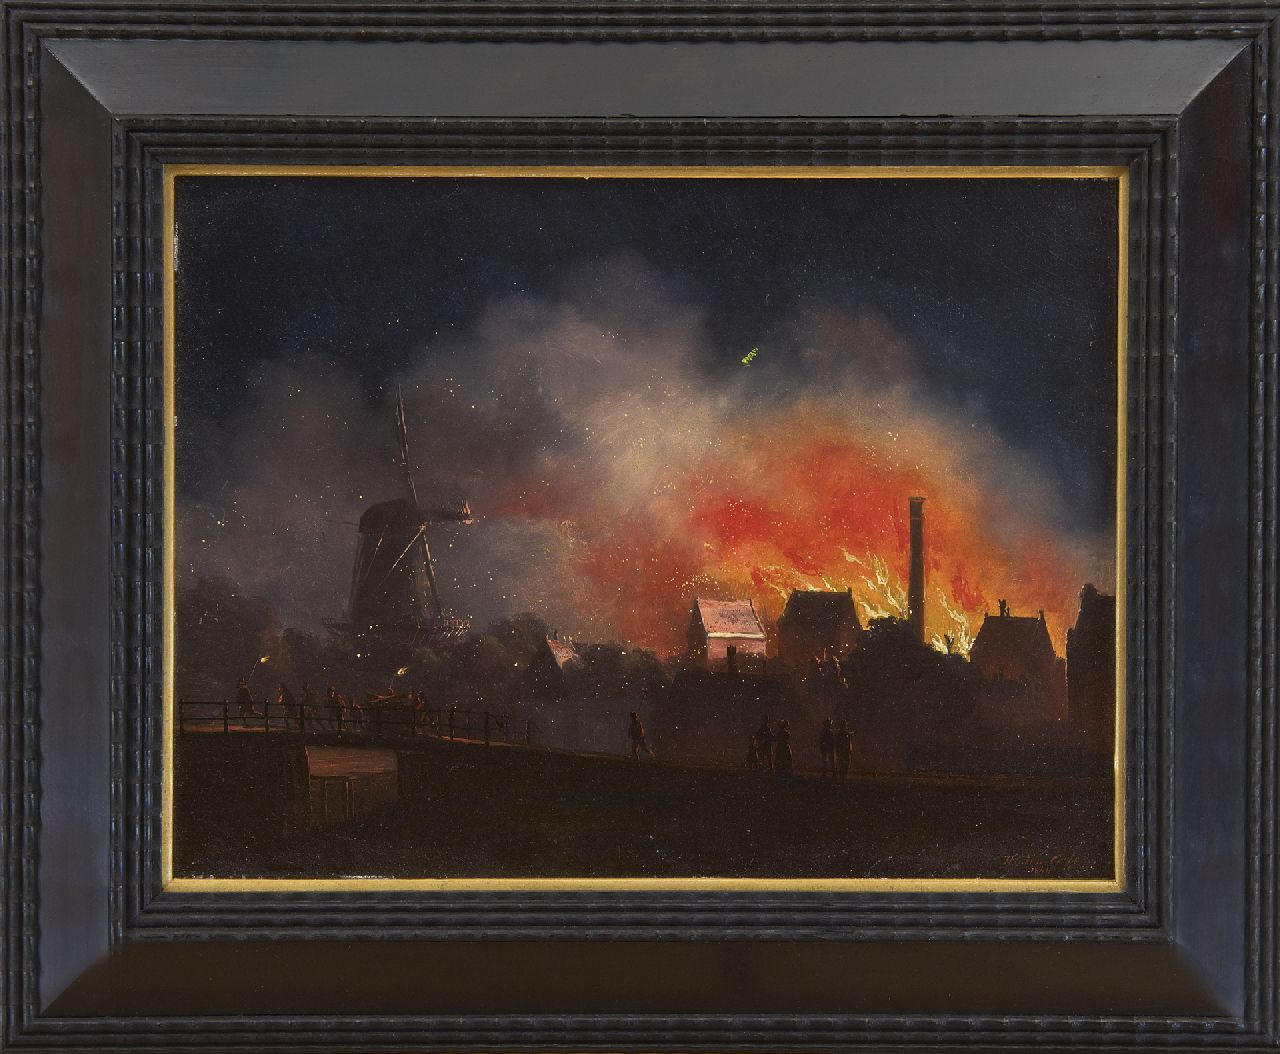 Cate H.G. ten | Hendrik Gerrit ten Cate, Fire at night (possibly the sugar refinery J.H. Rupe & Zn te Amsterdam, 19 October 1845), oil on panel 21.0 x 27.7 cm, signed l.r. and dated 1849